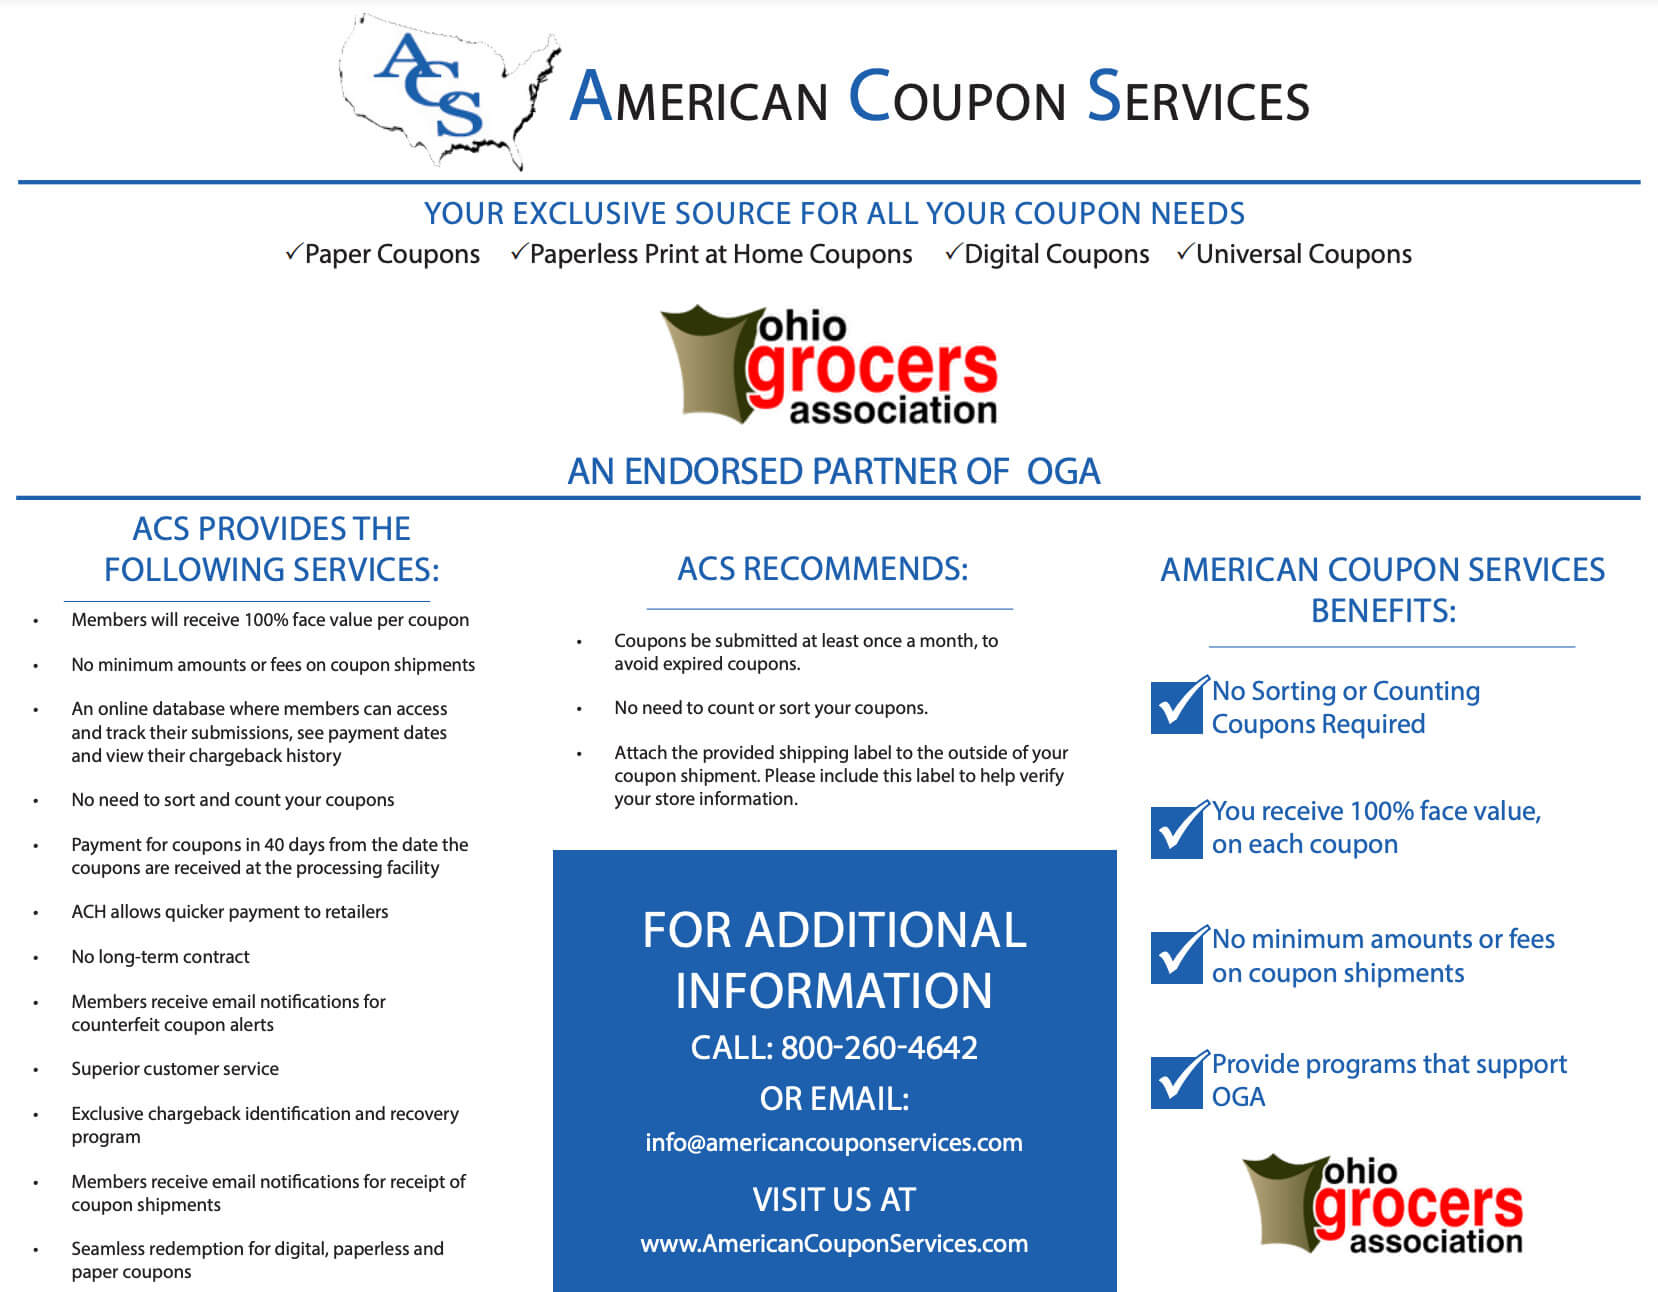 American Coupon Services